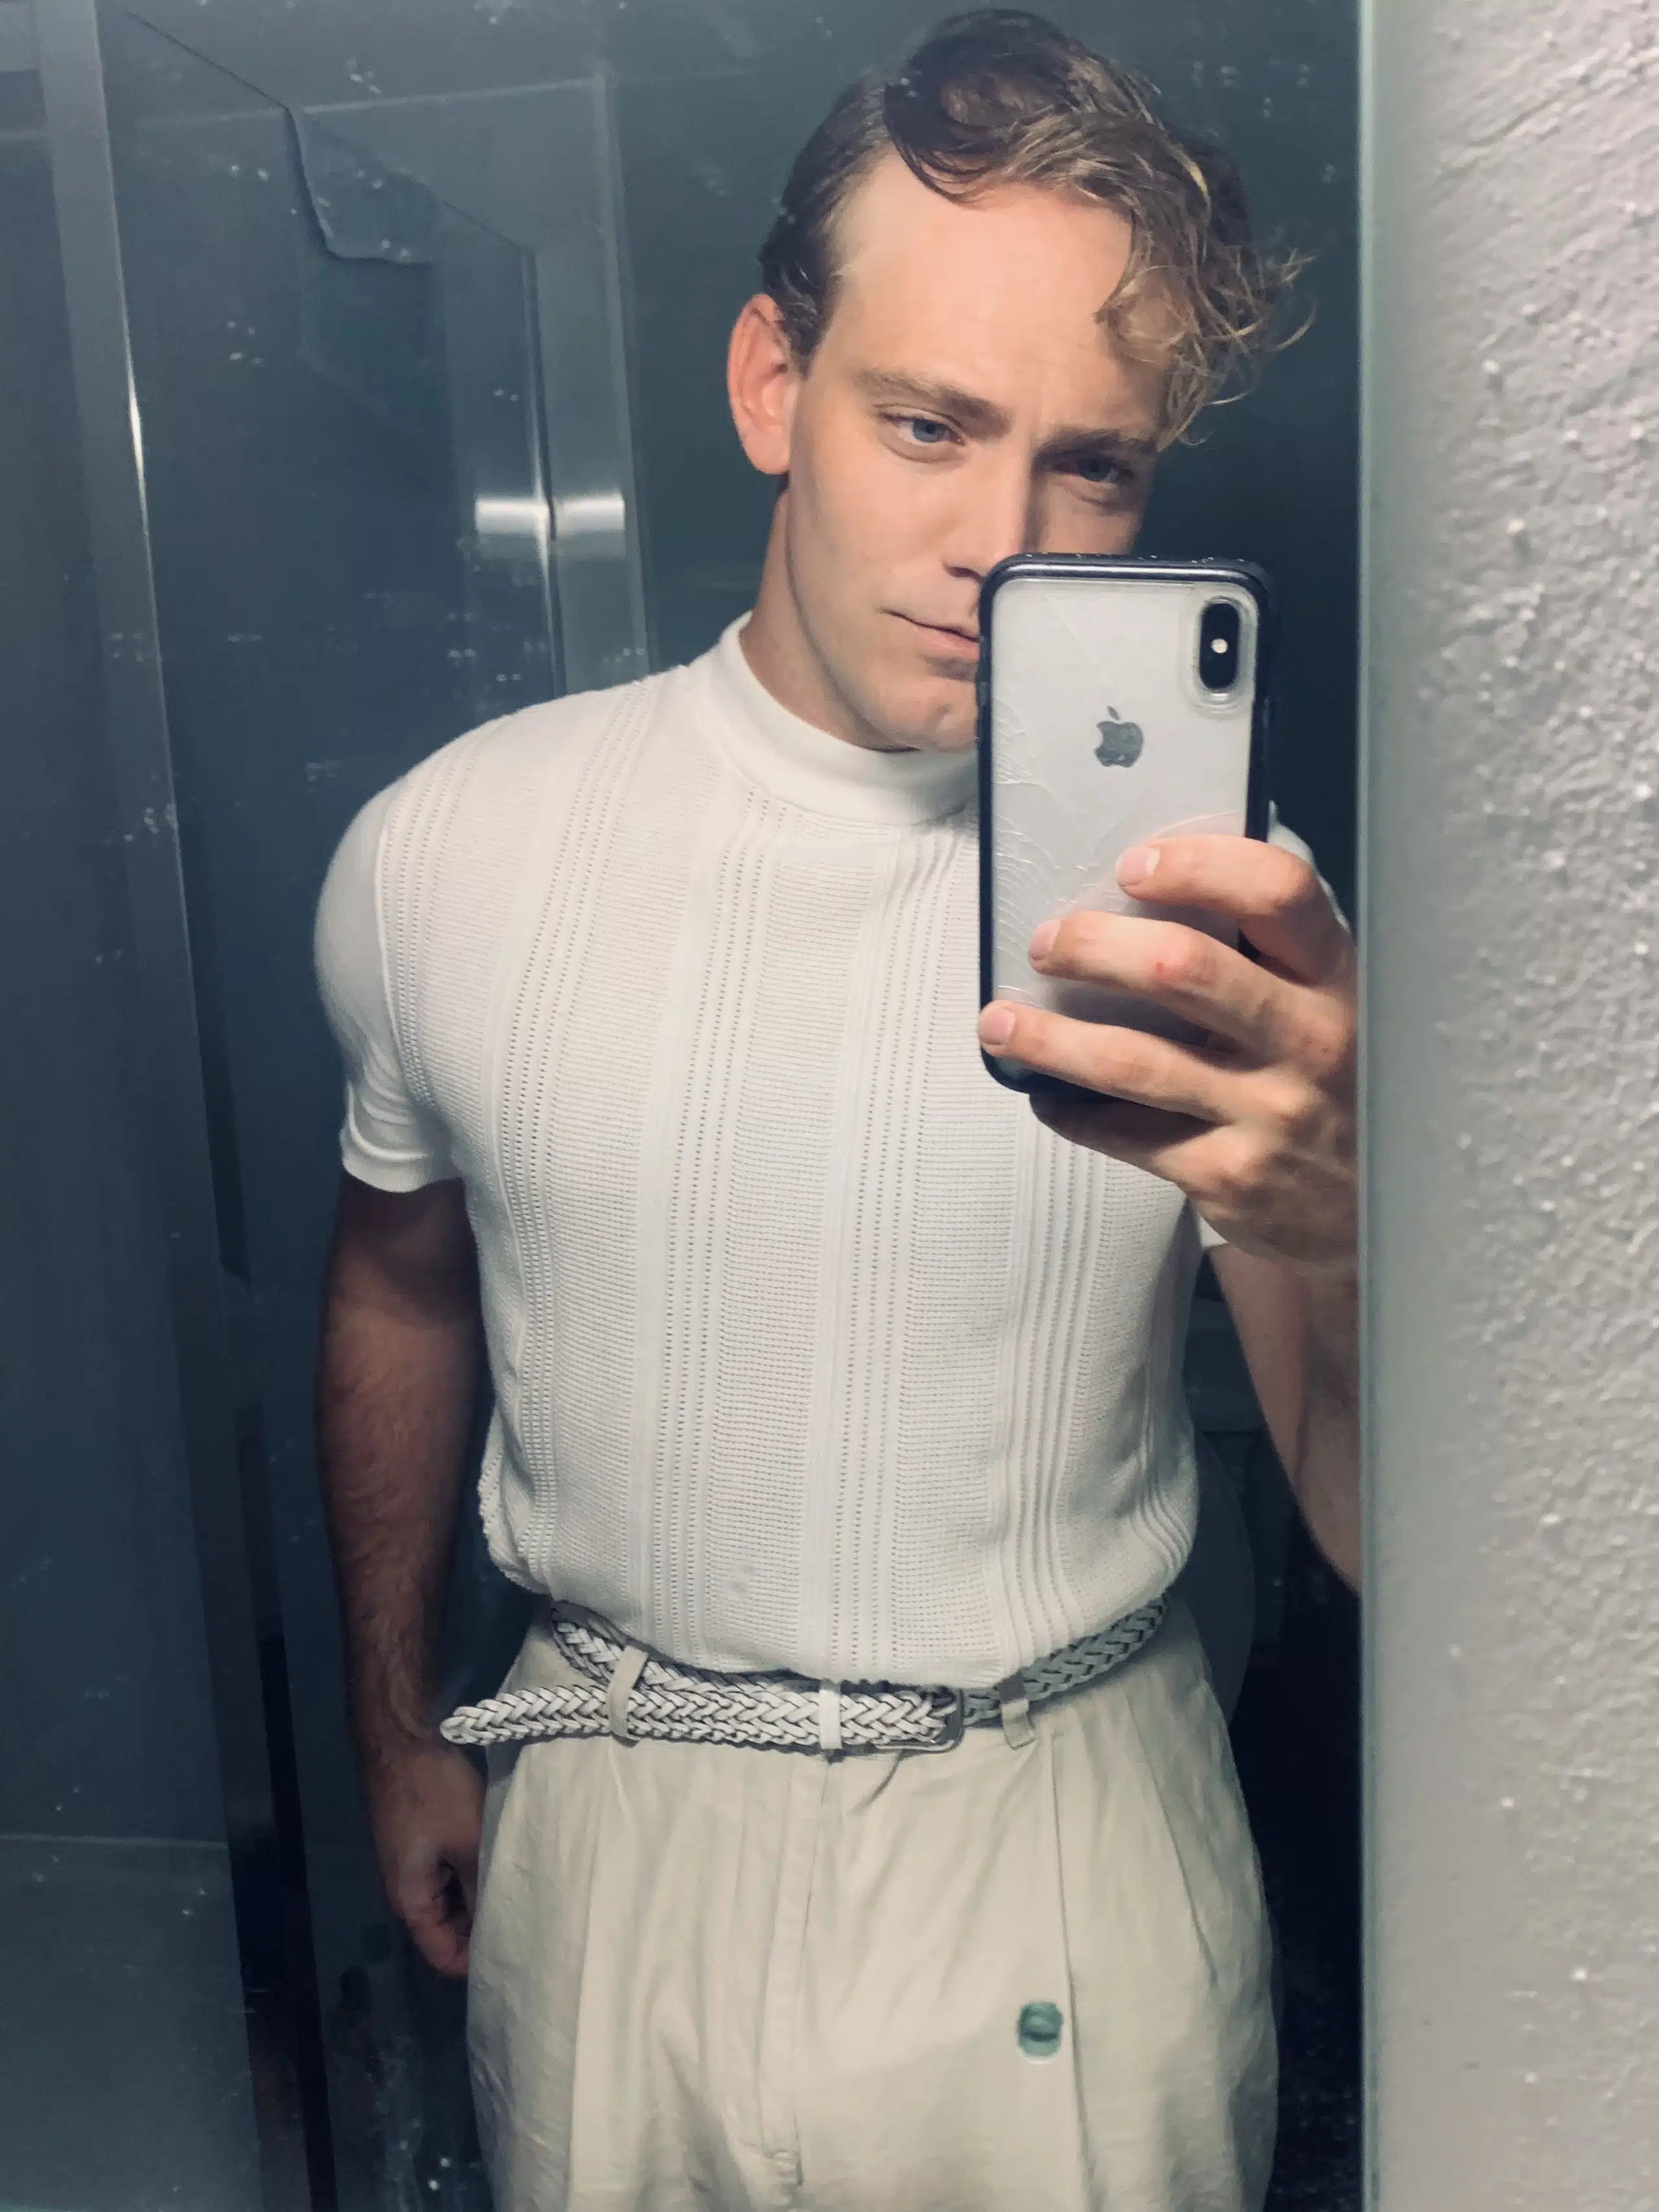 Selfie of Tom Jackson Greaves. The image features an individual standing close in front of a mirror with a white Iphone in their hand. They are dressed in plain white clothing and have long combed over hair.